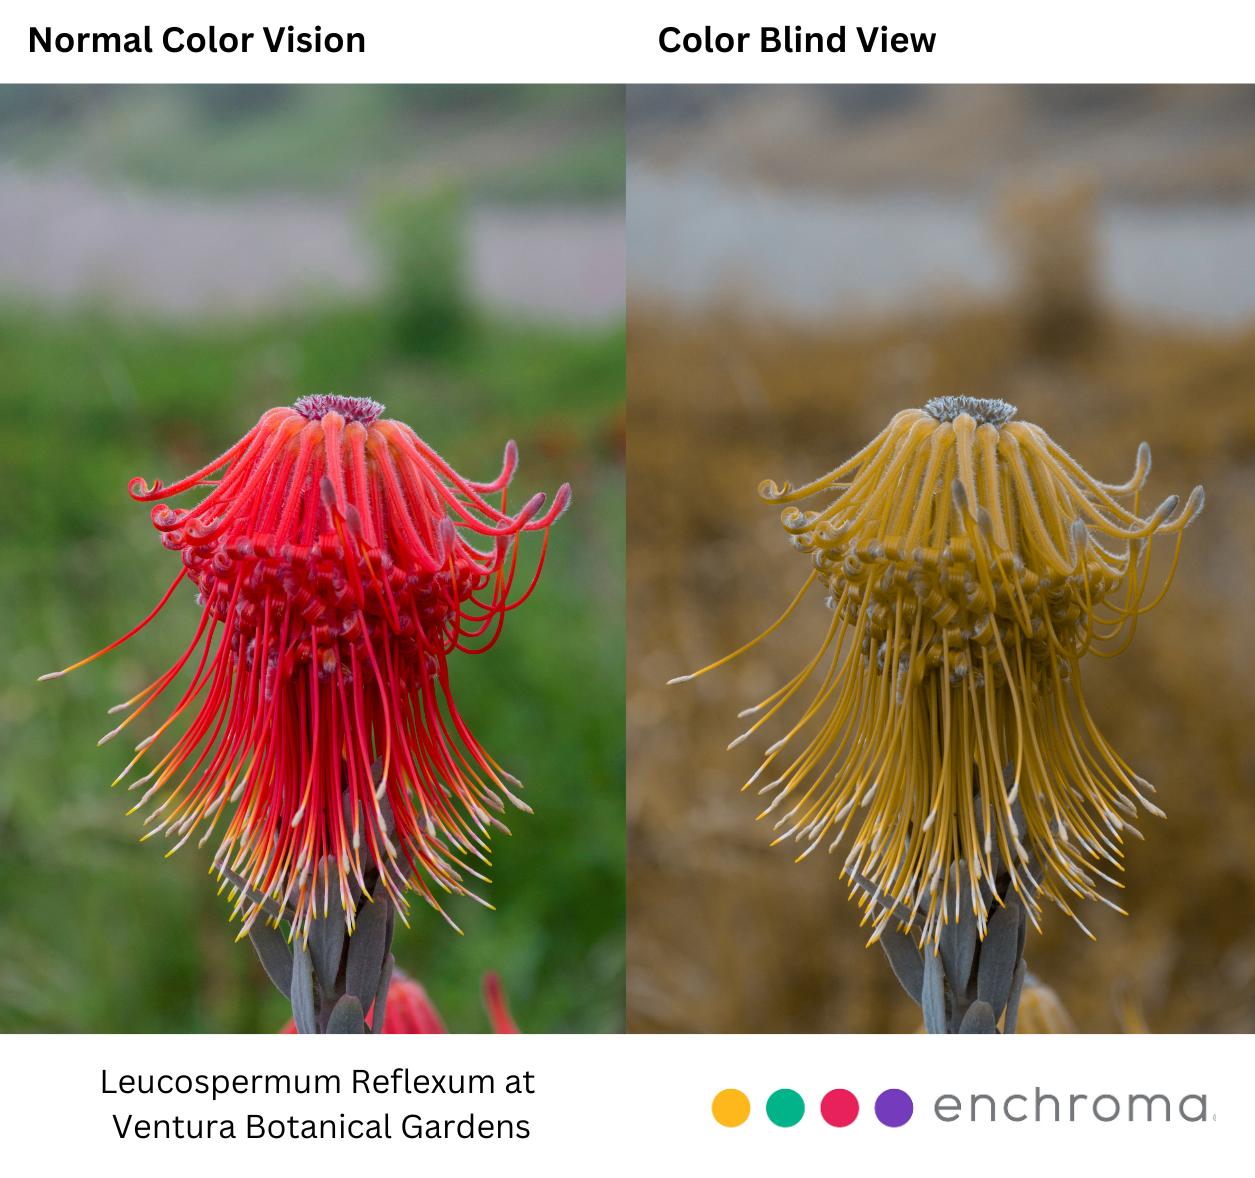 New Viewer and Glasses for Color Blind Visitors Now Available at Ventura Botanical Gardens